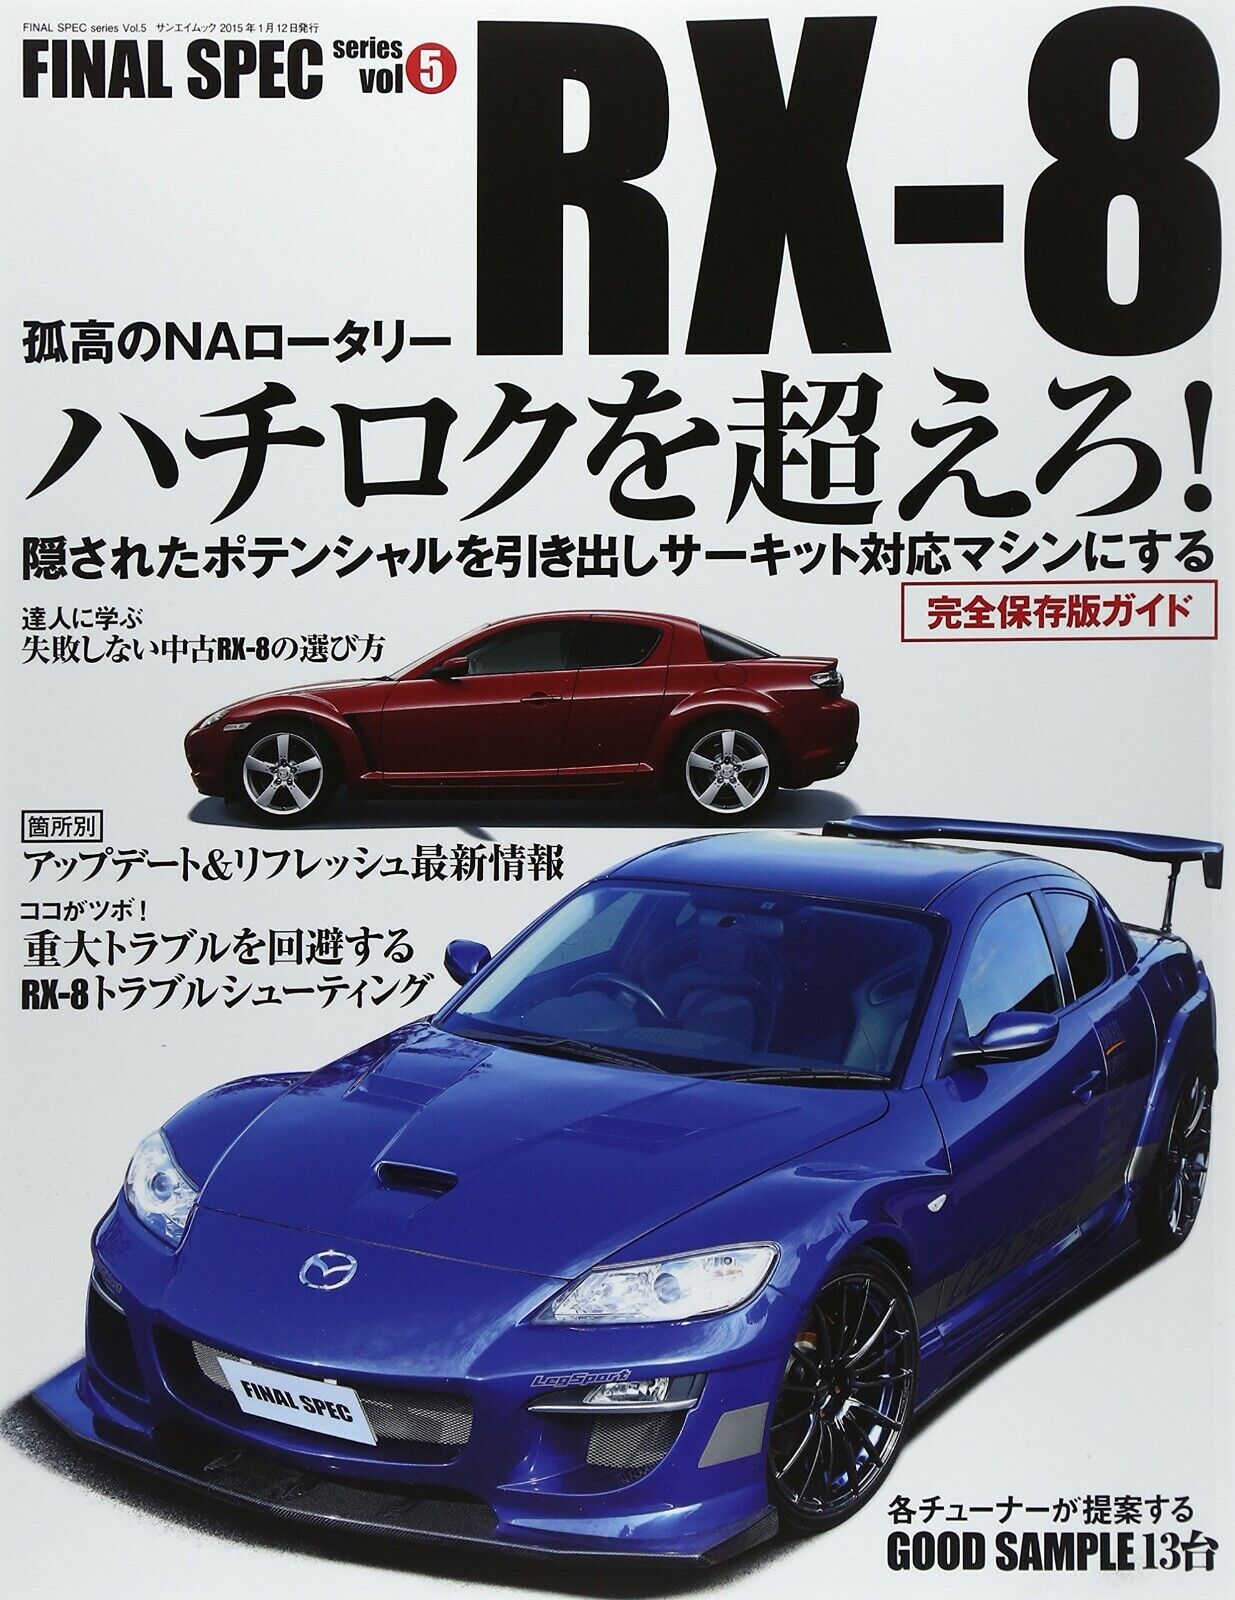 FINAL SPEC MAZDA RX-8 Japanese Dress Up & Tuning Book 4779622859